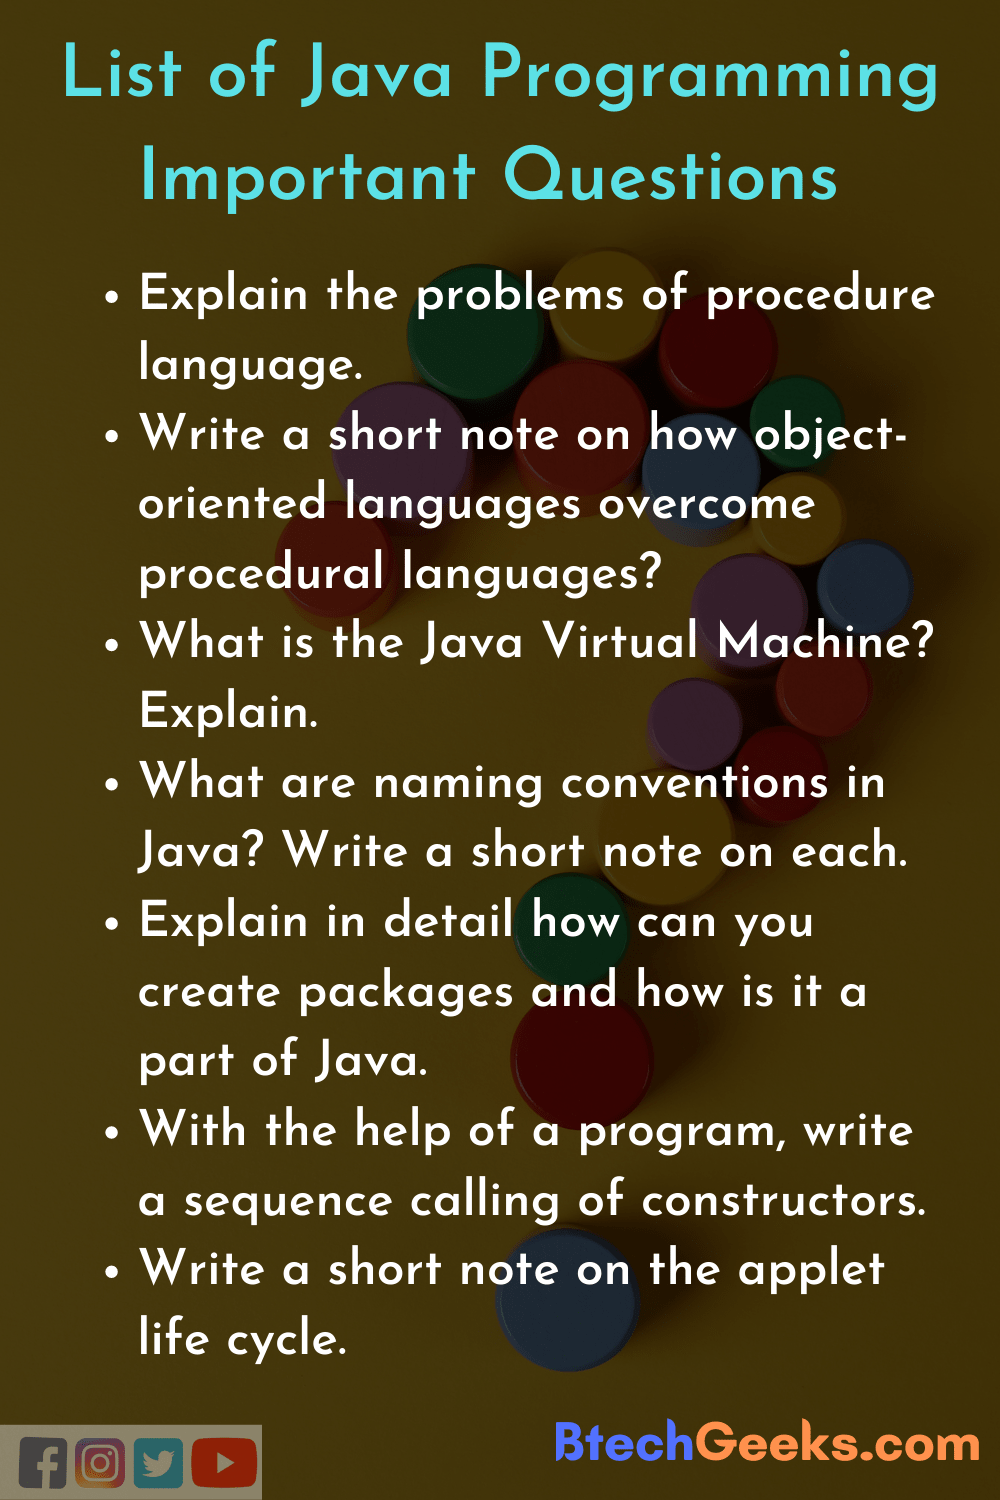 List of Important Questions in Java Programming